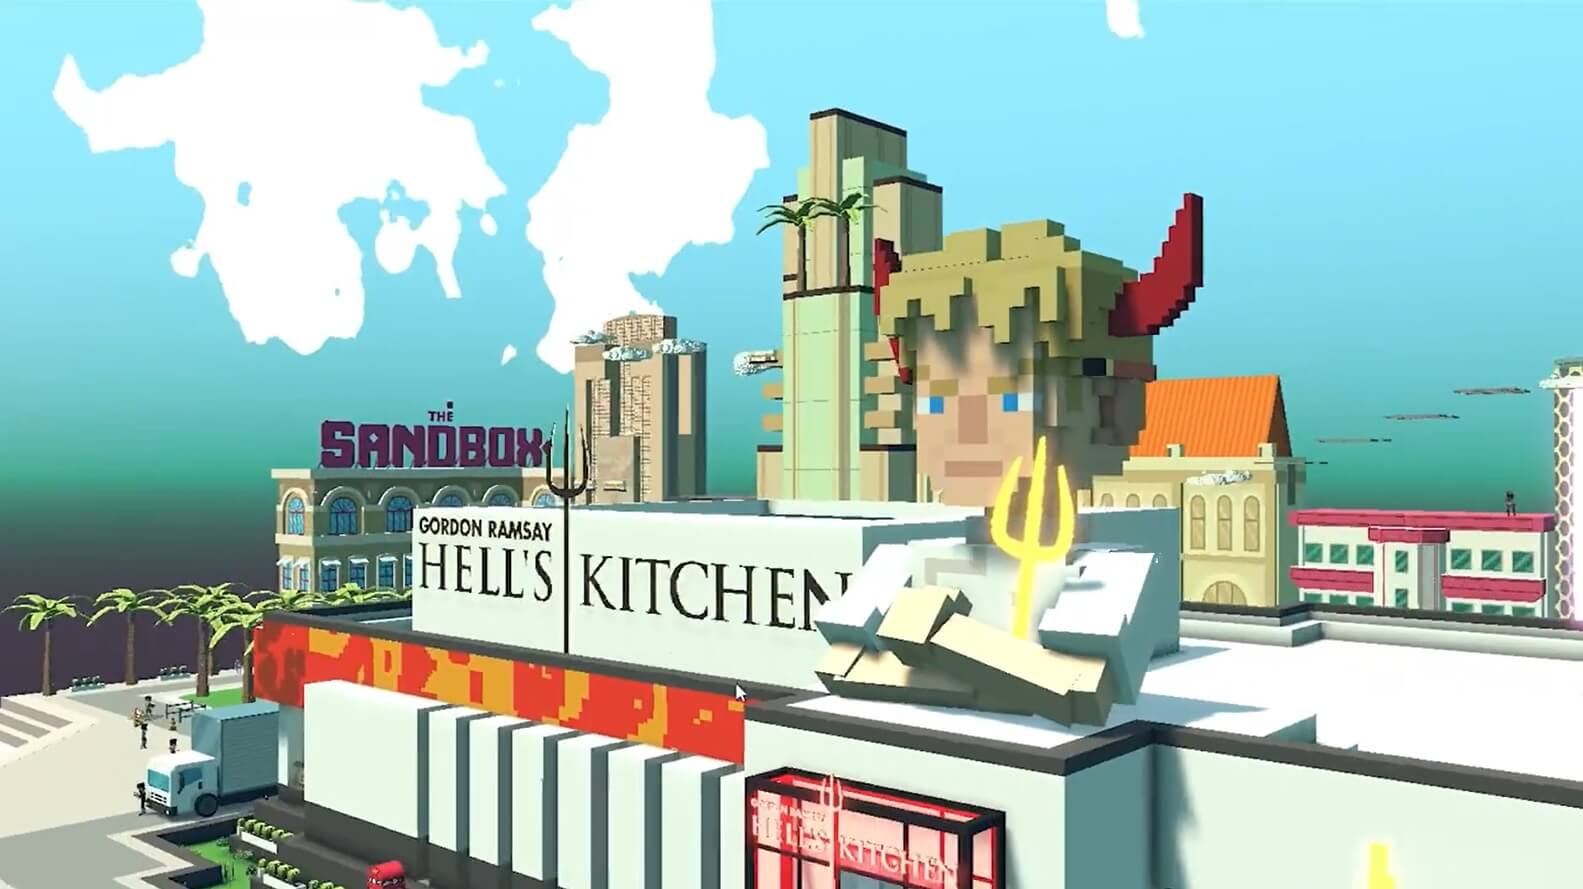 Hell’s Kitchen Partners with The Sandbox and Brings Gordon Ramsay to Metaverse